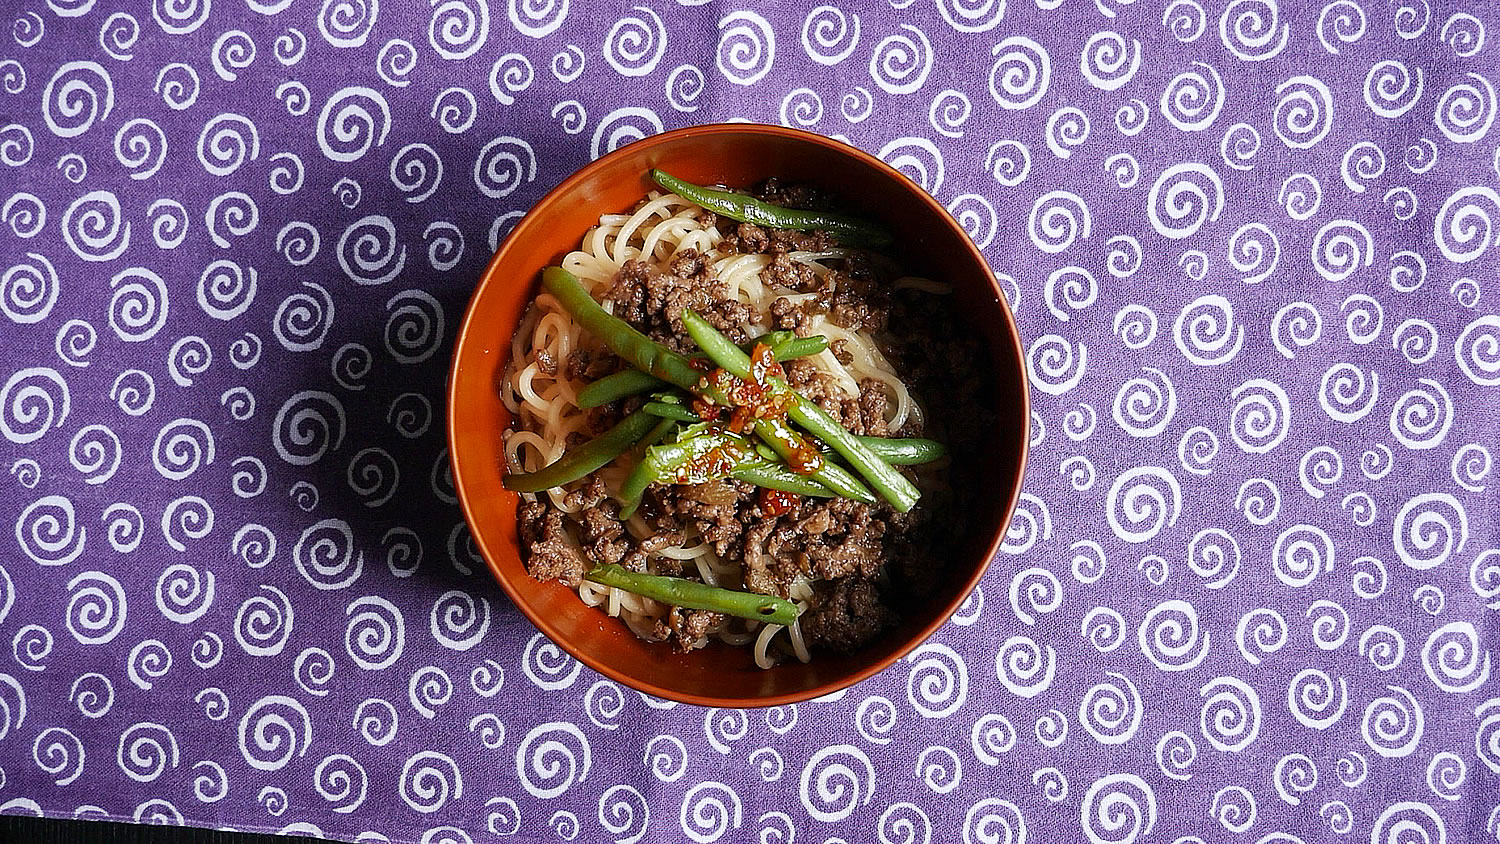 Spicy sichuan noodles without soup